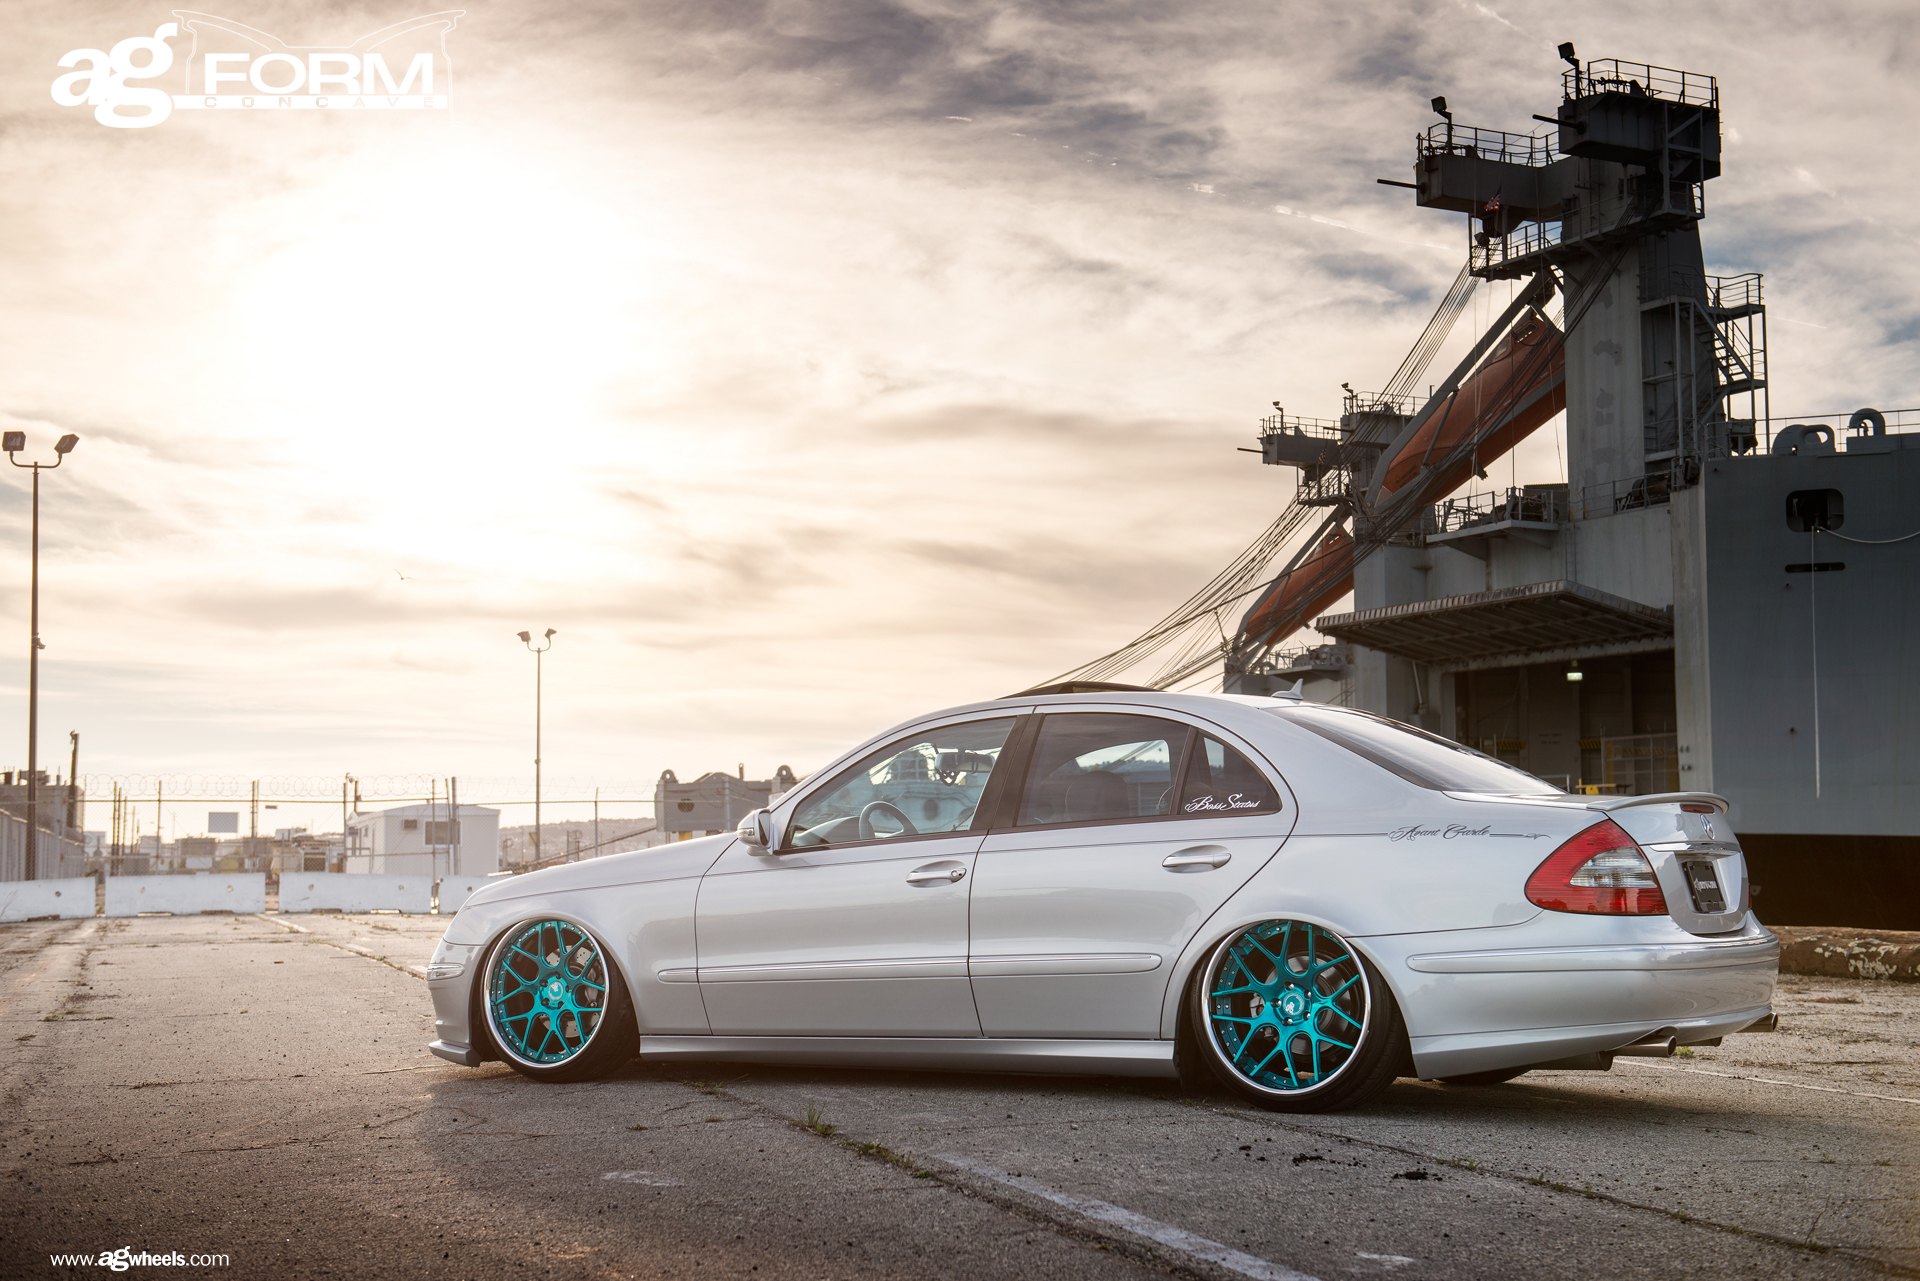 Aftermarket Side Skirts on Silver Lowered Mercedes E-Class - Photo by Avant Garde Wheels